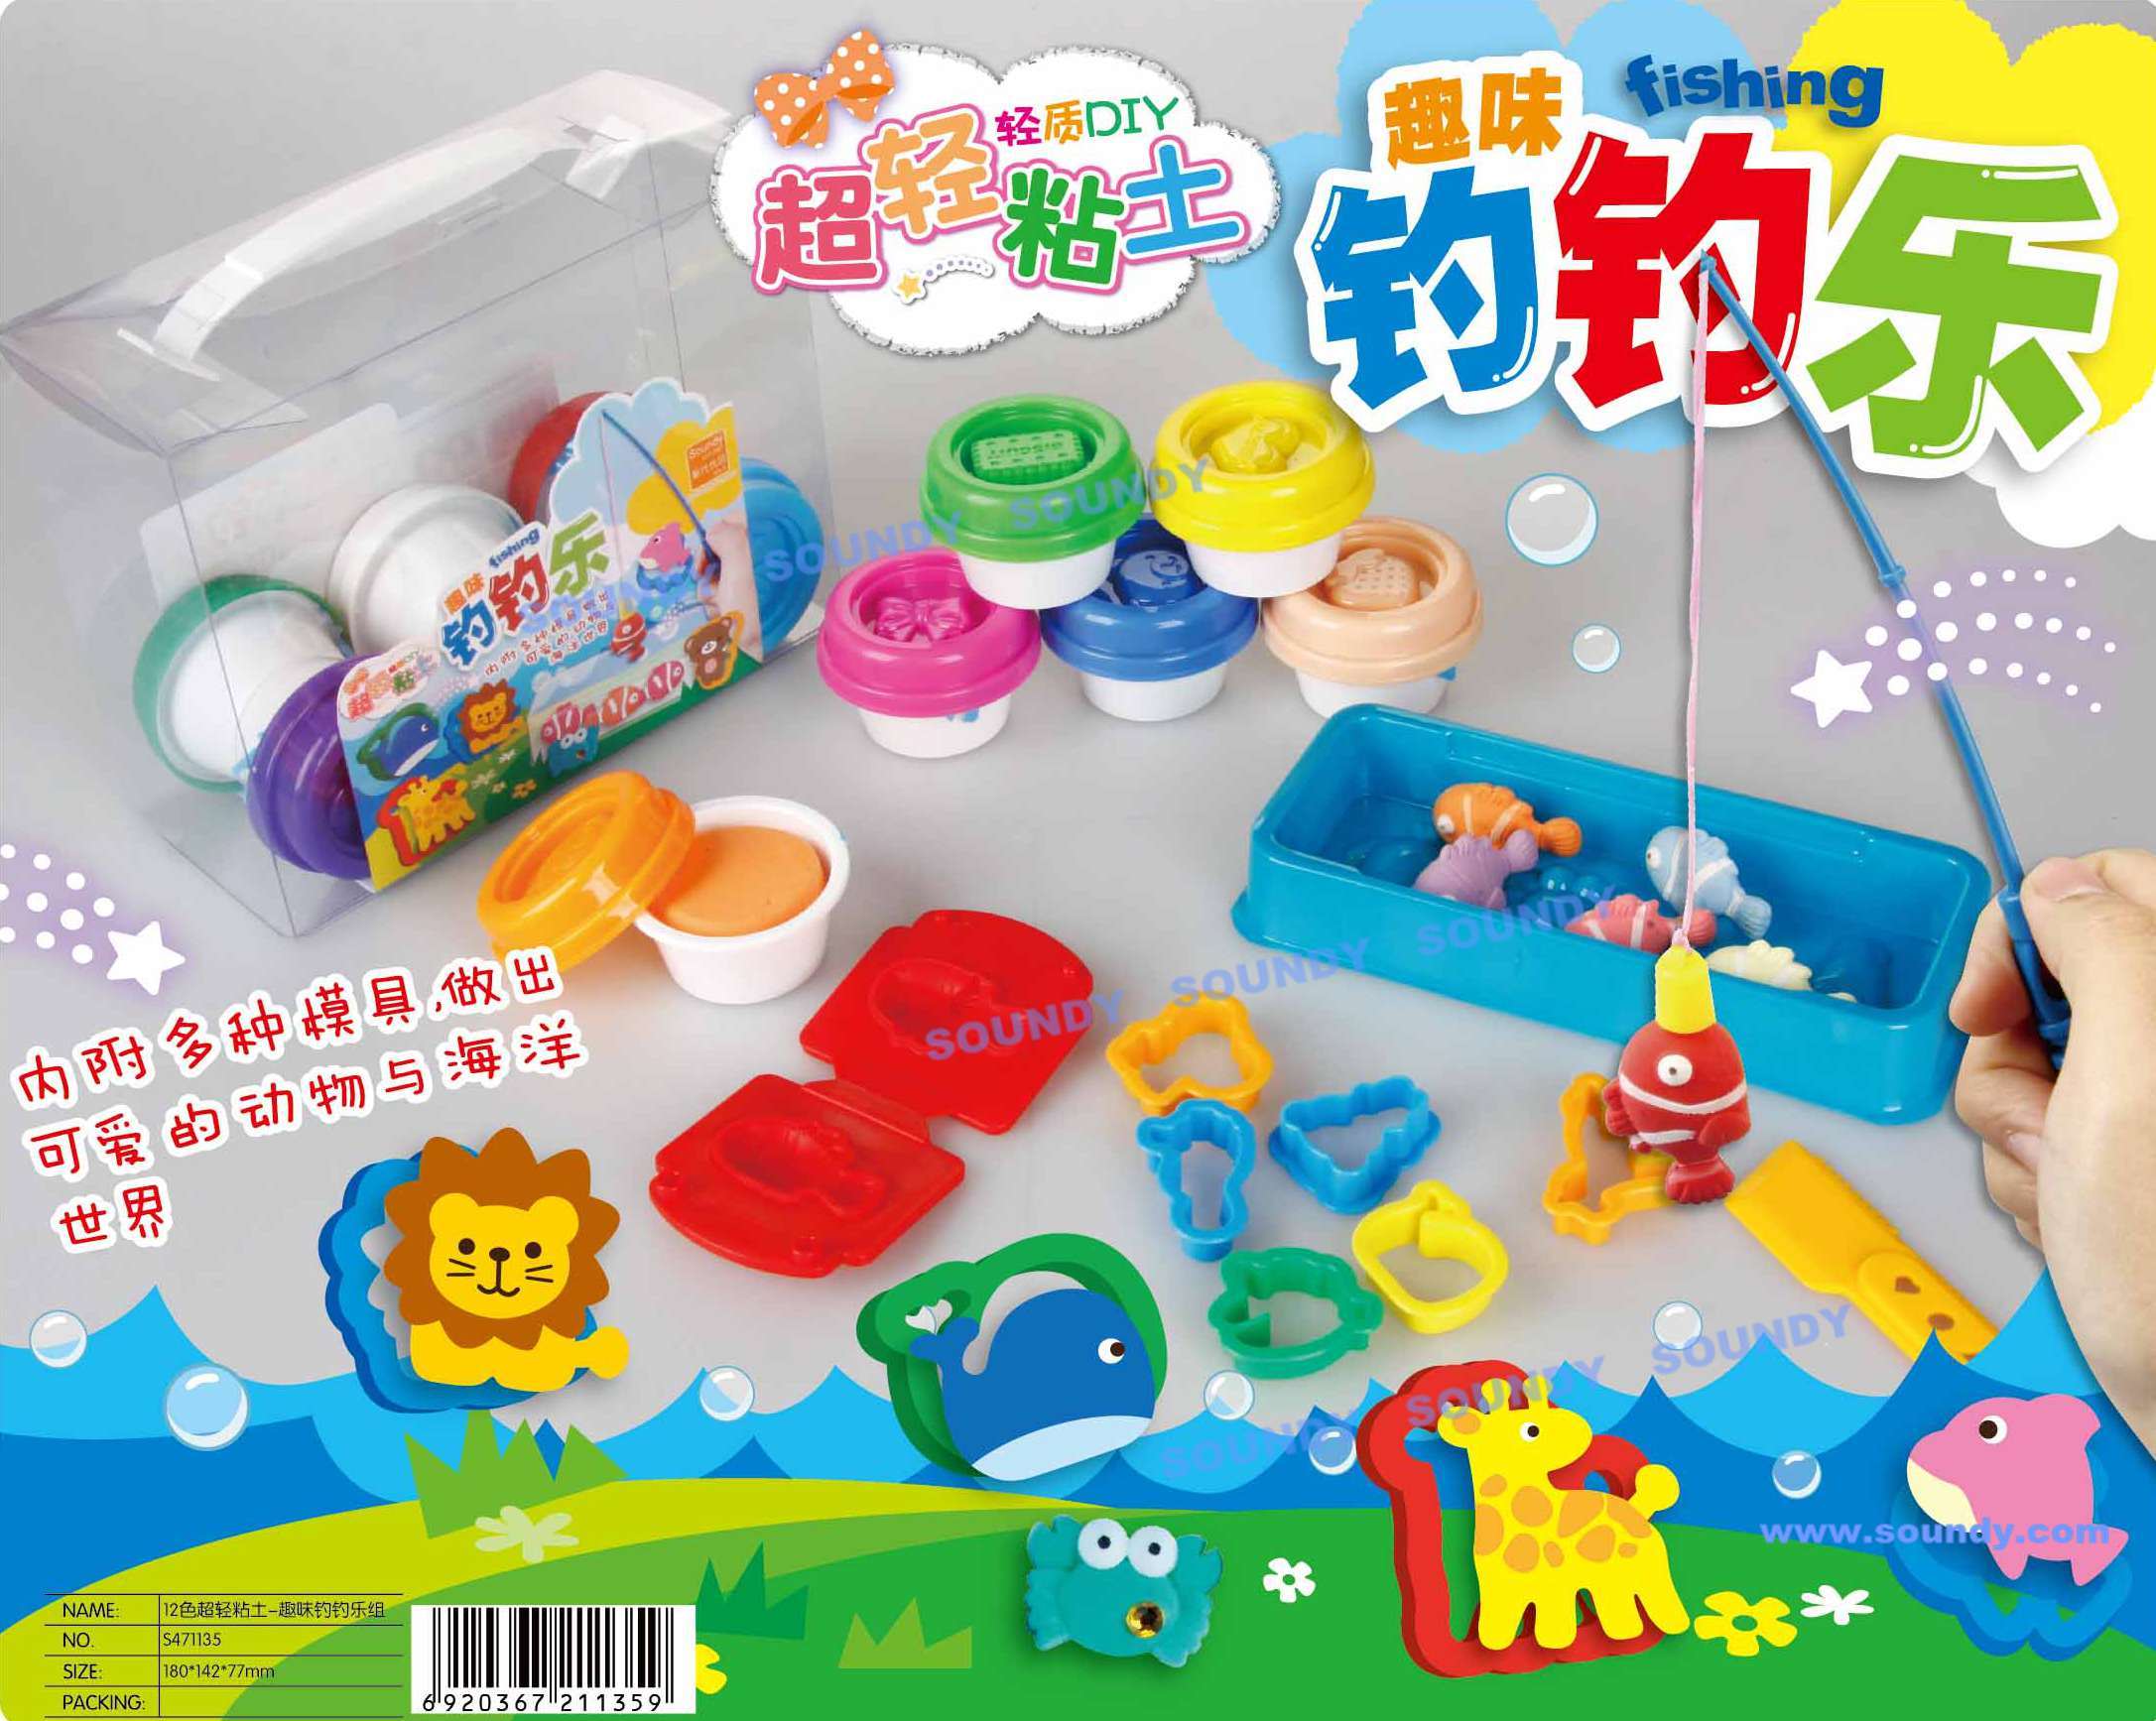 12 Colors Articlay/Modeling Clay- Fishing Set (S471135, stationery)